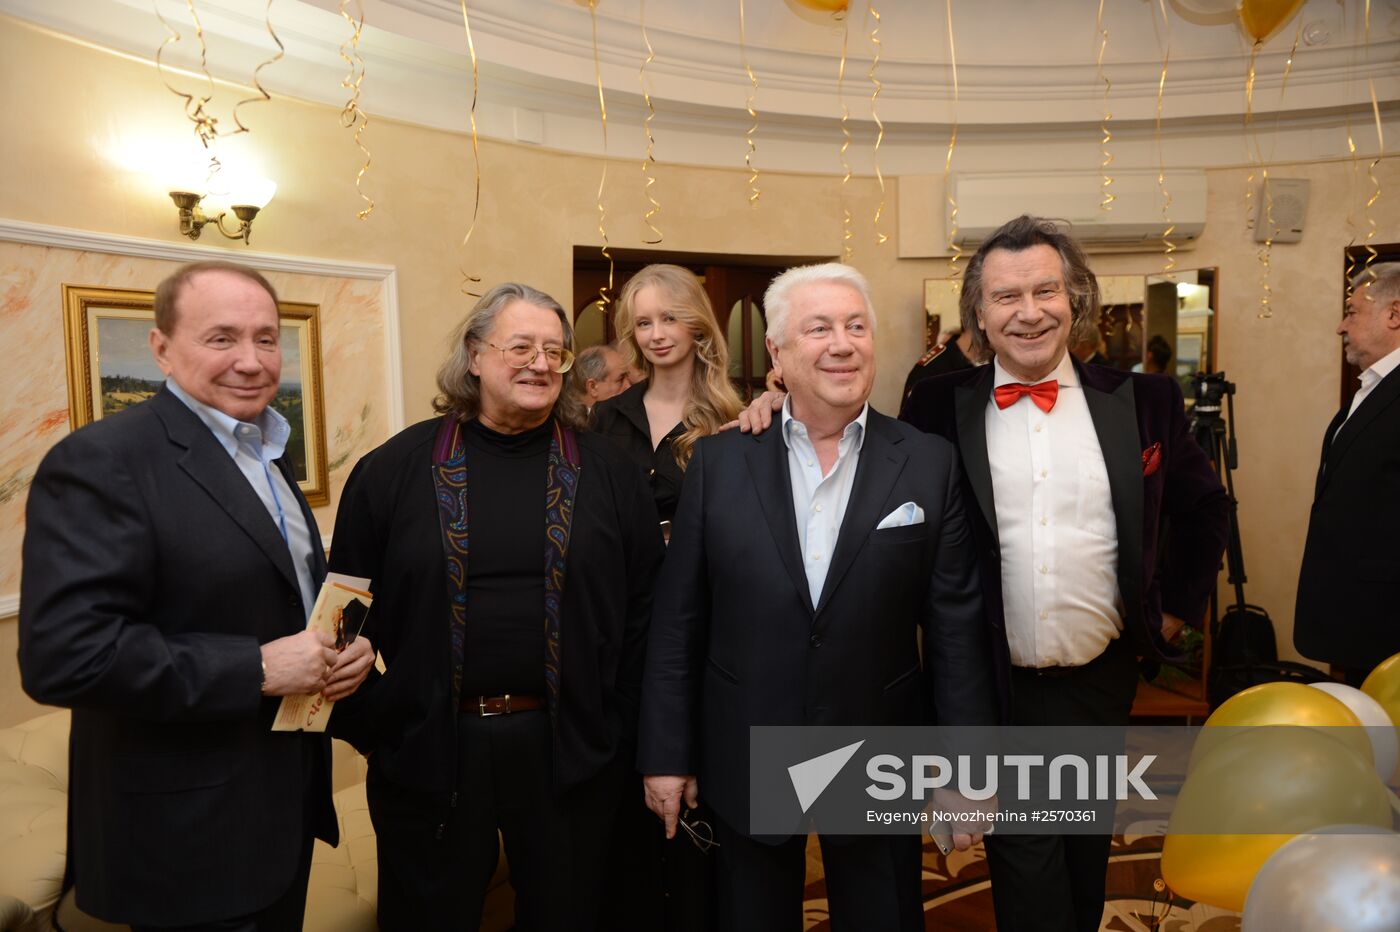 Vladimir Zeldin's anniversary party: "100 or Dances with Time"